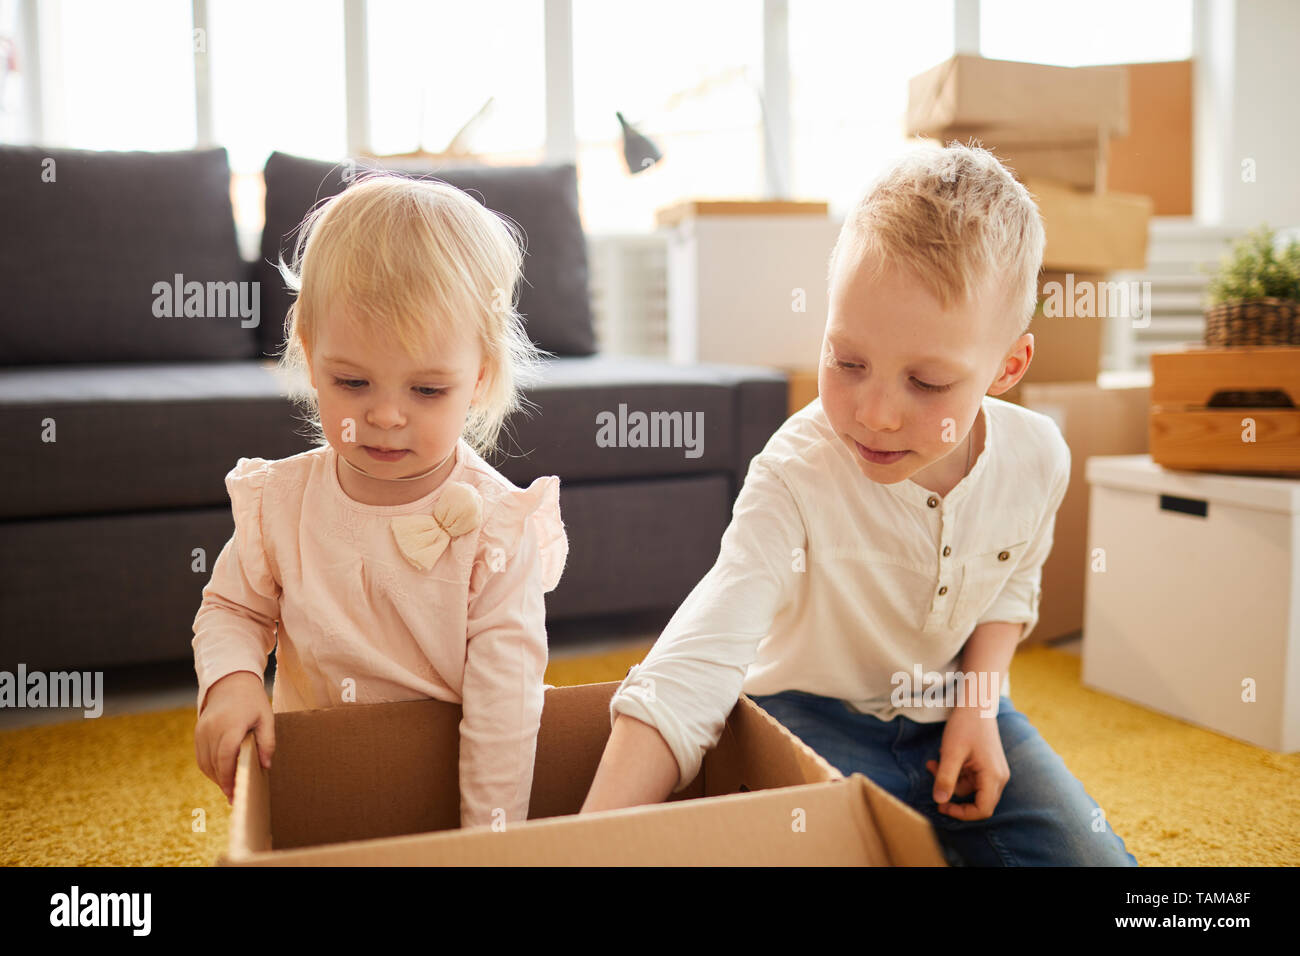 Serious curious brother and sister sitting on floor into new home and fining things while unpacking box together Stock Photo